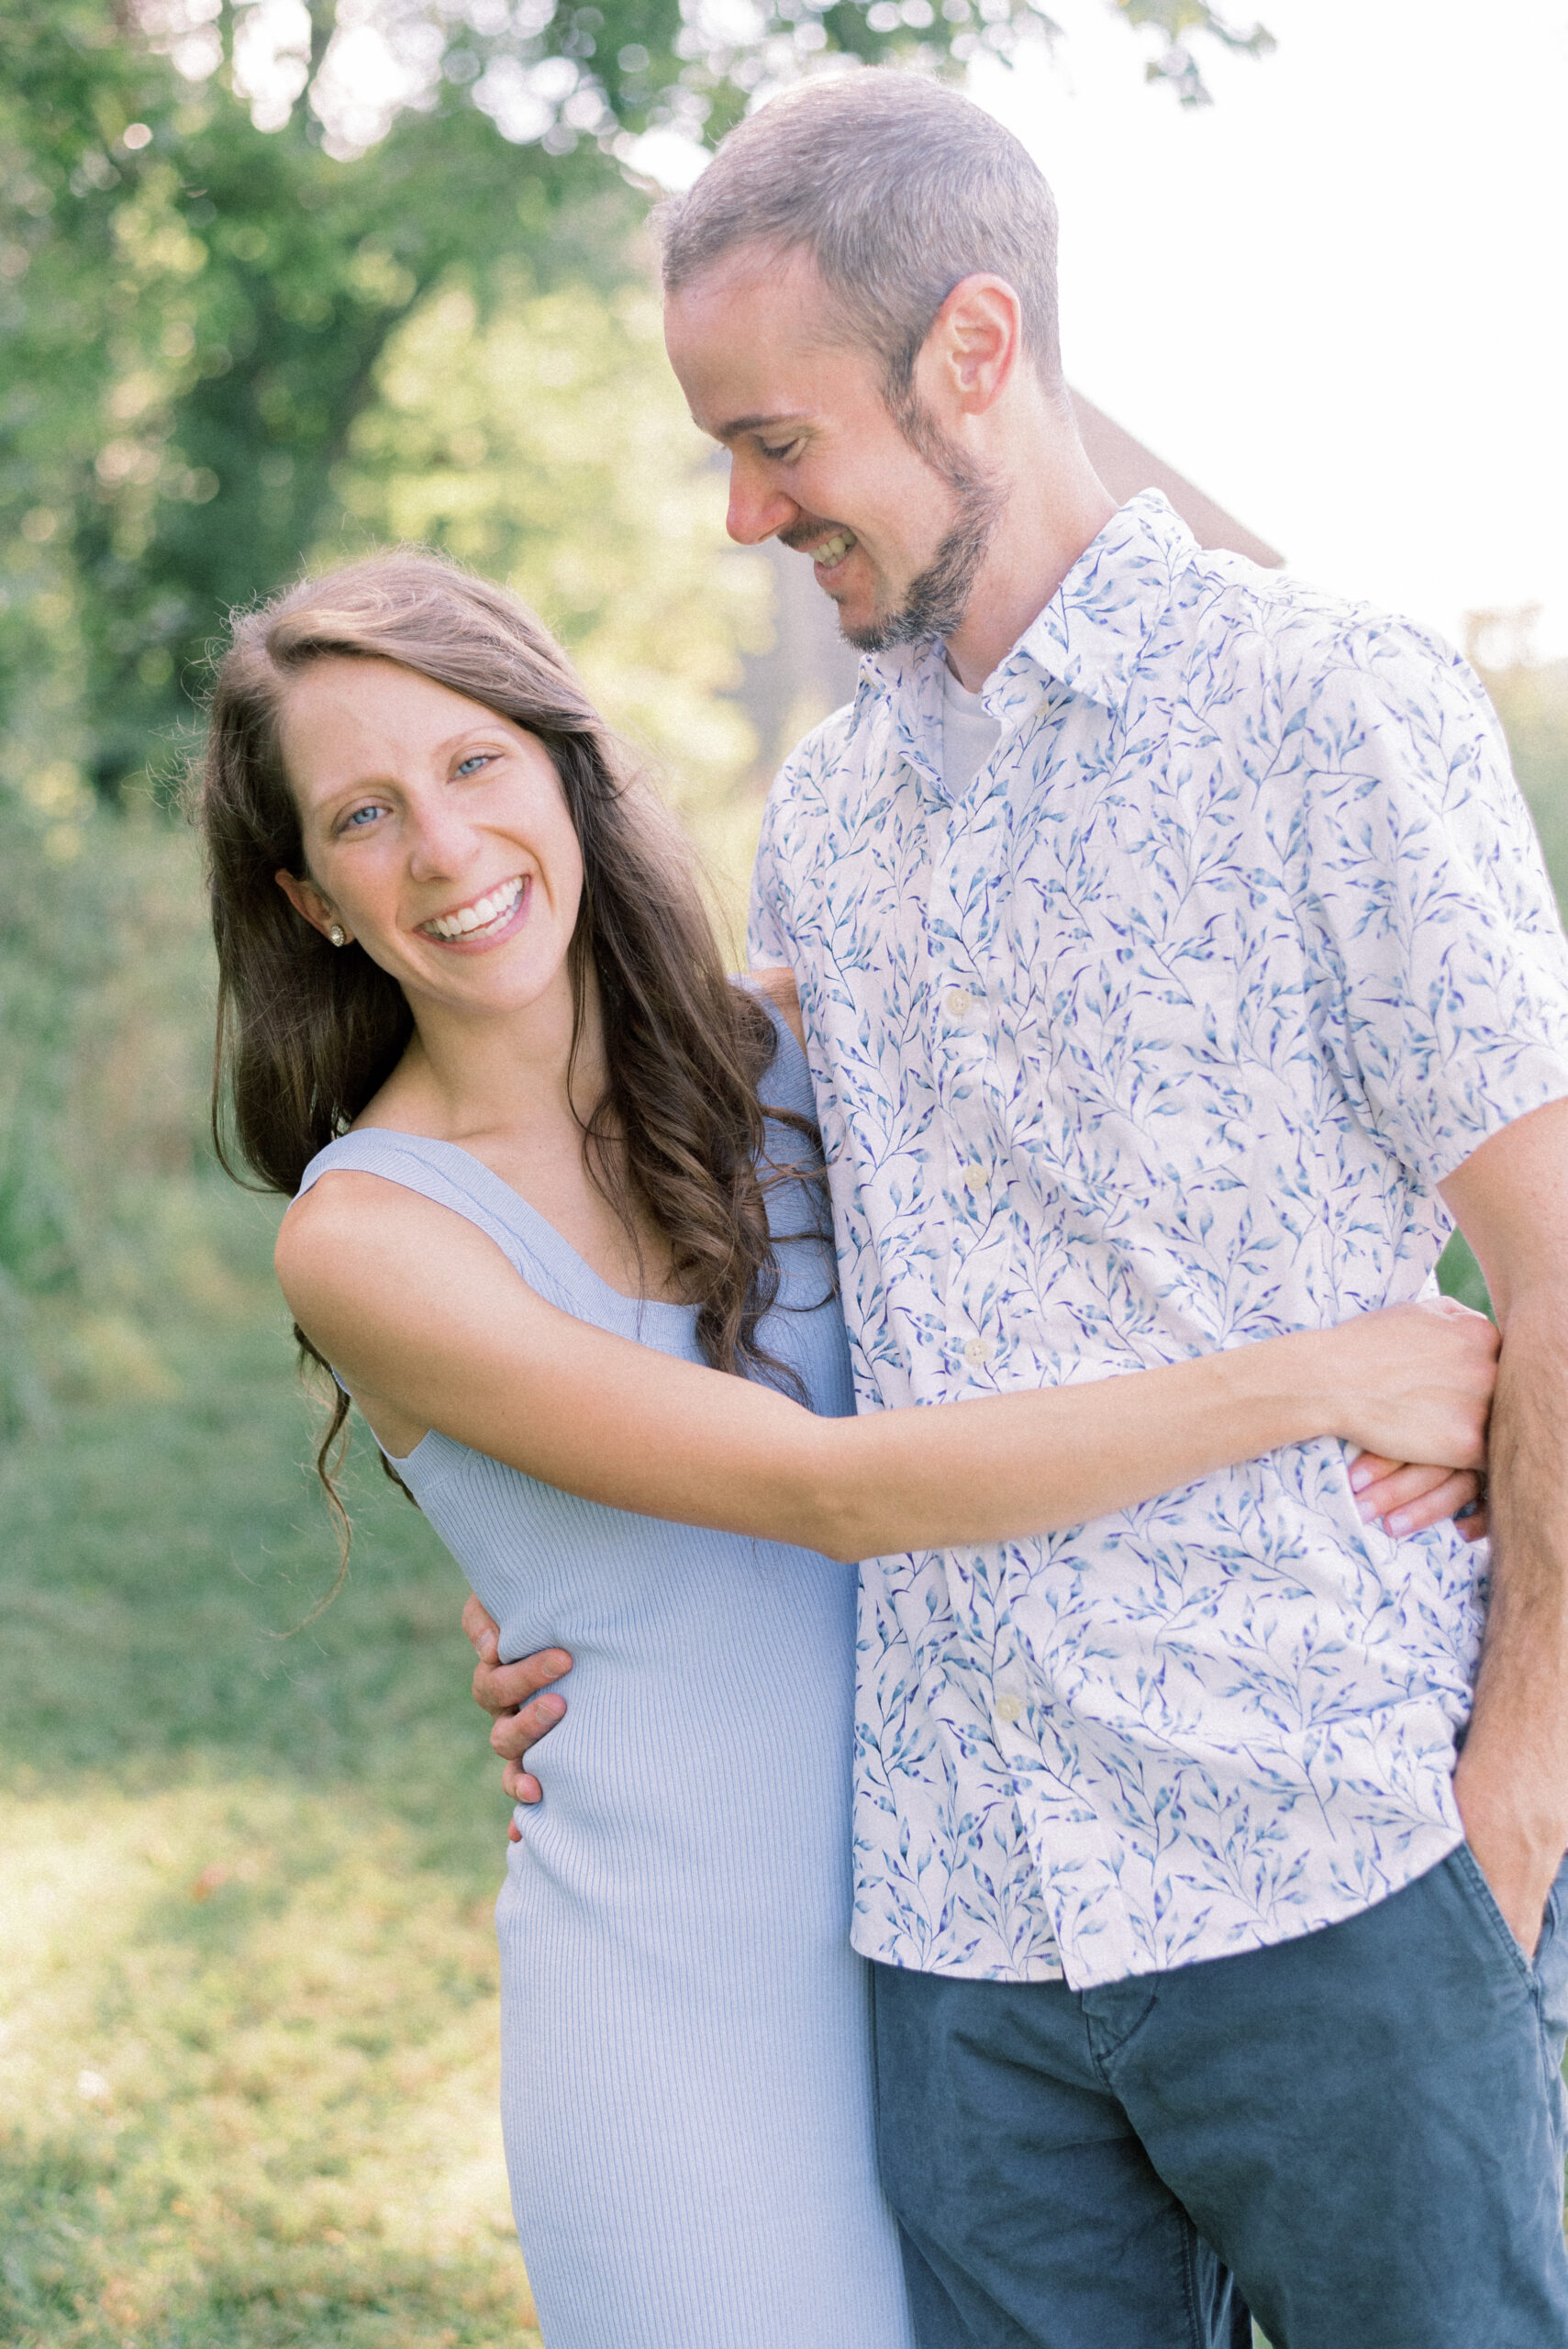 Maryland photographer captures husband and wife laughing together